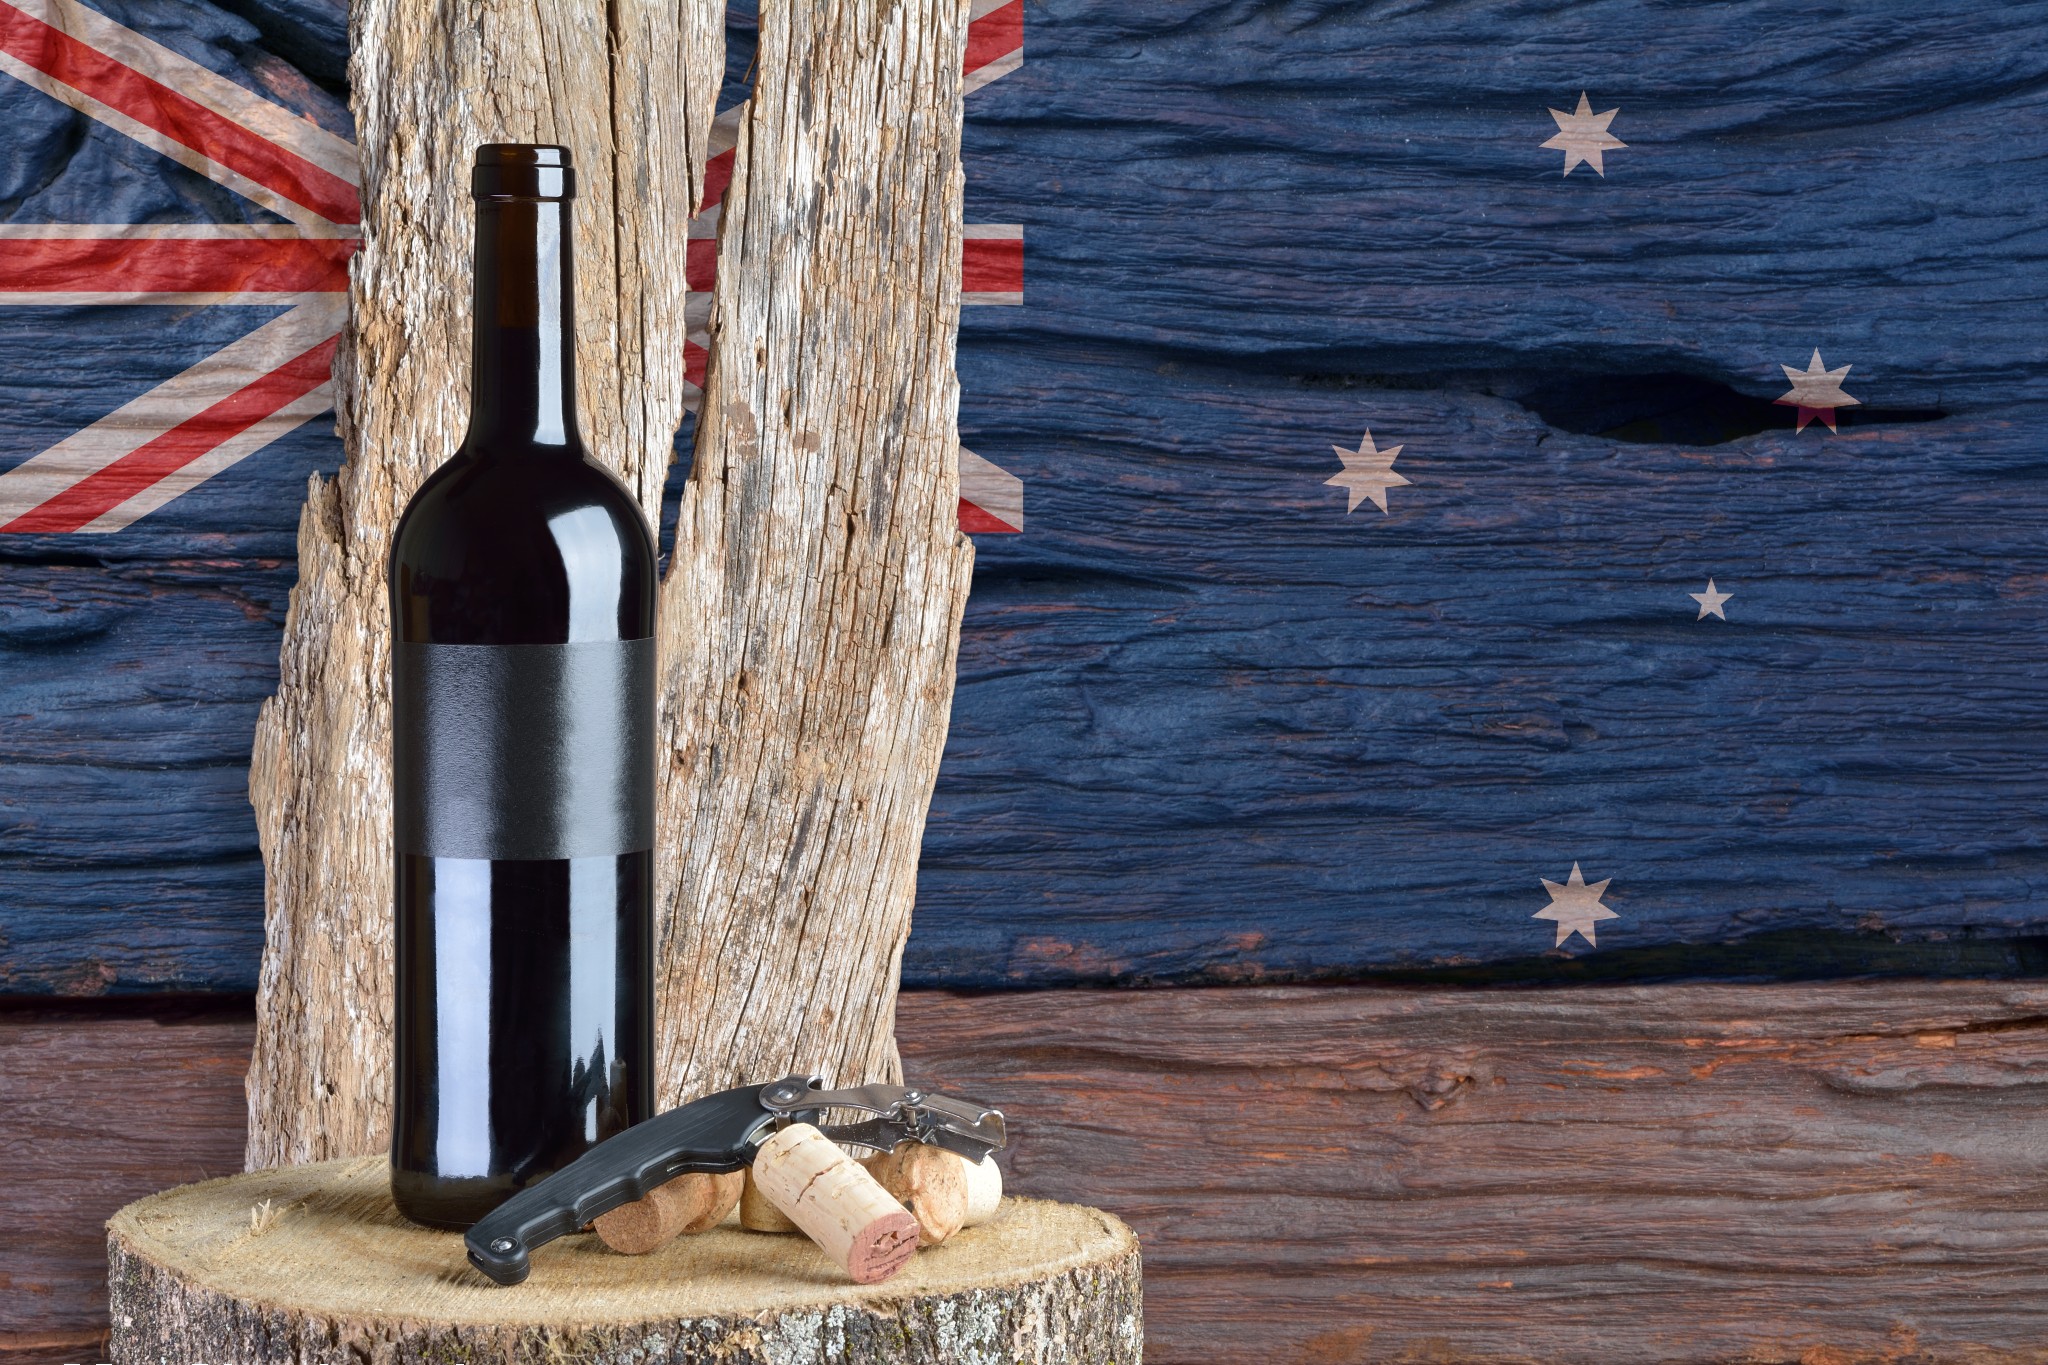 Australian Consumers Hardly Recall Wine Brands During The Pandemic